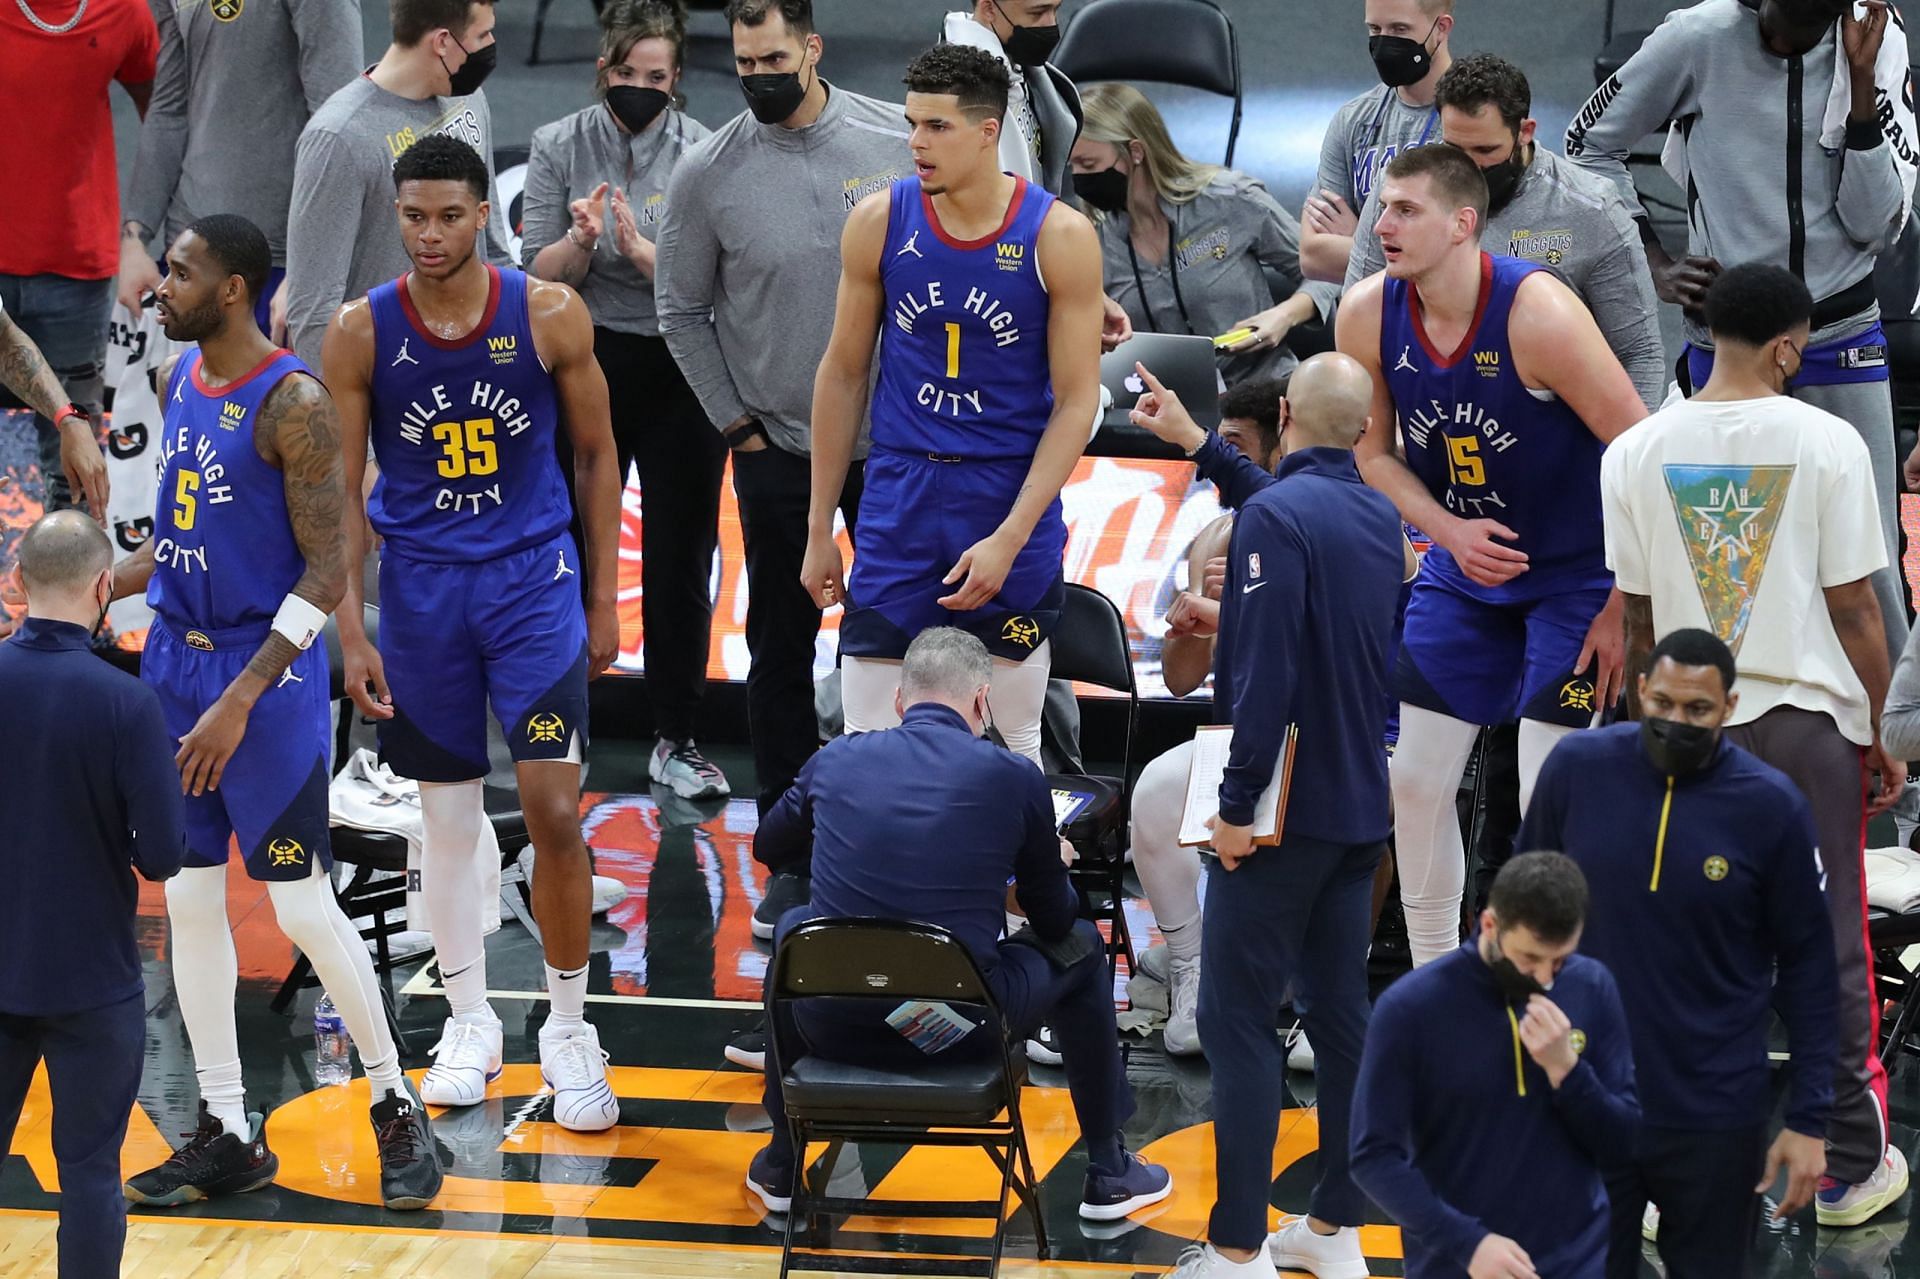 The Denver Nuggets&#039; lengthy injury list has affected their rhythm and consistency. [Photo: Nugg Love]